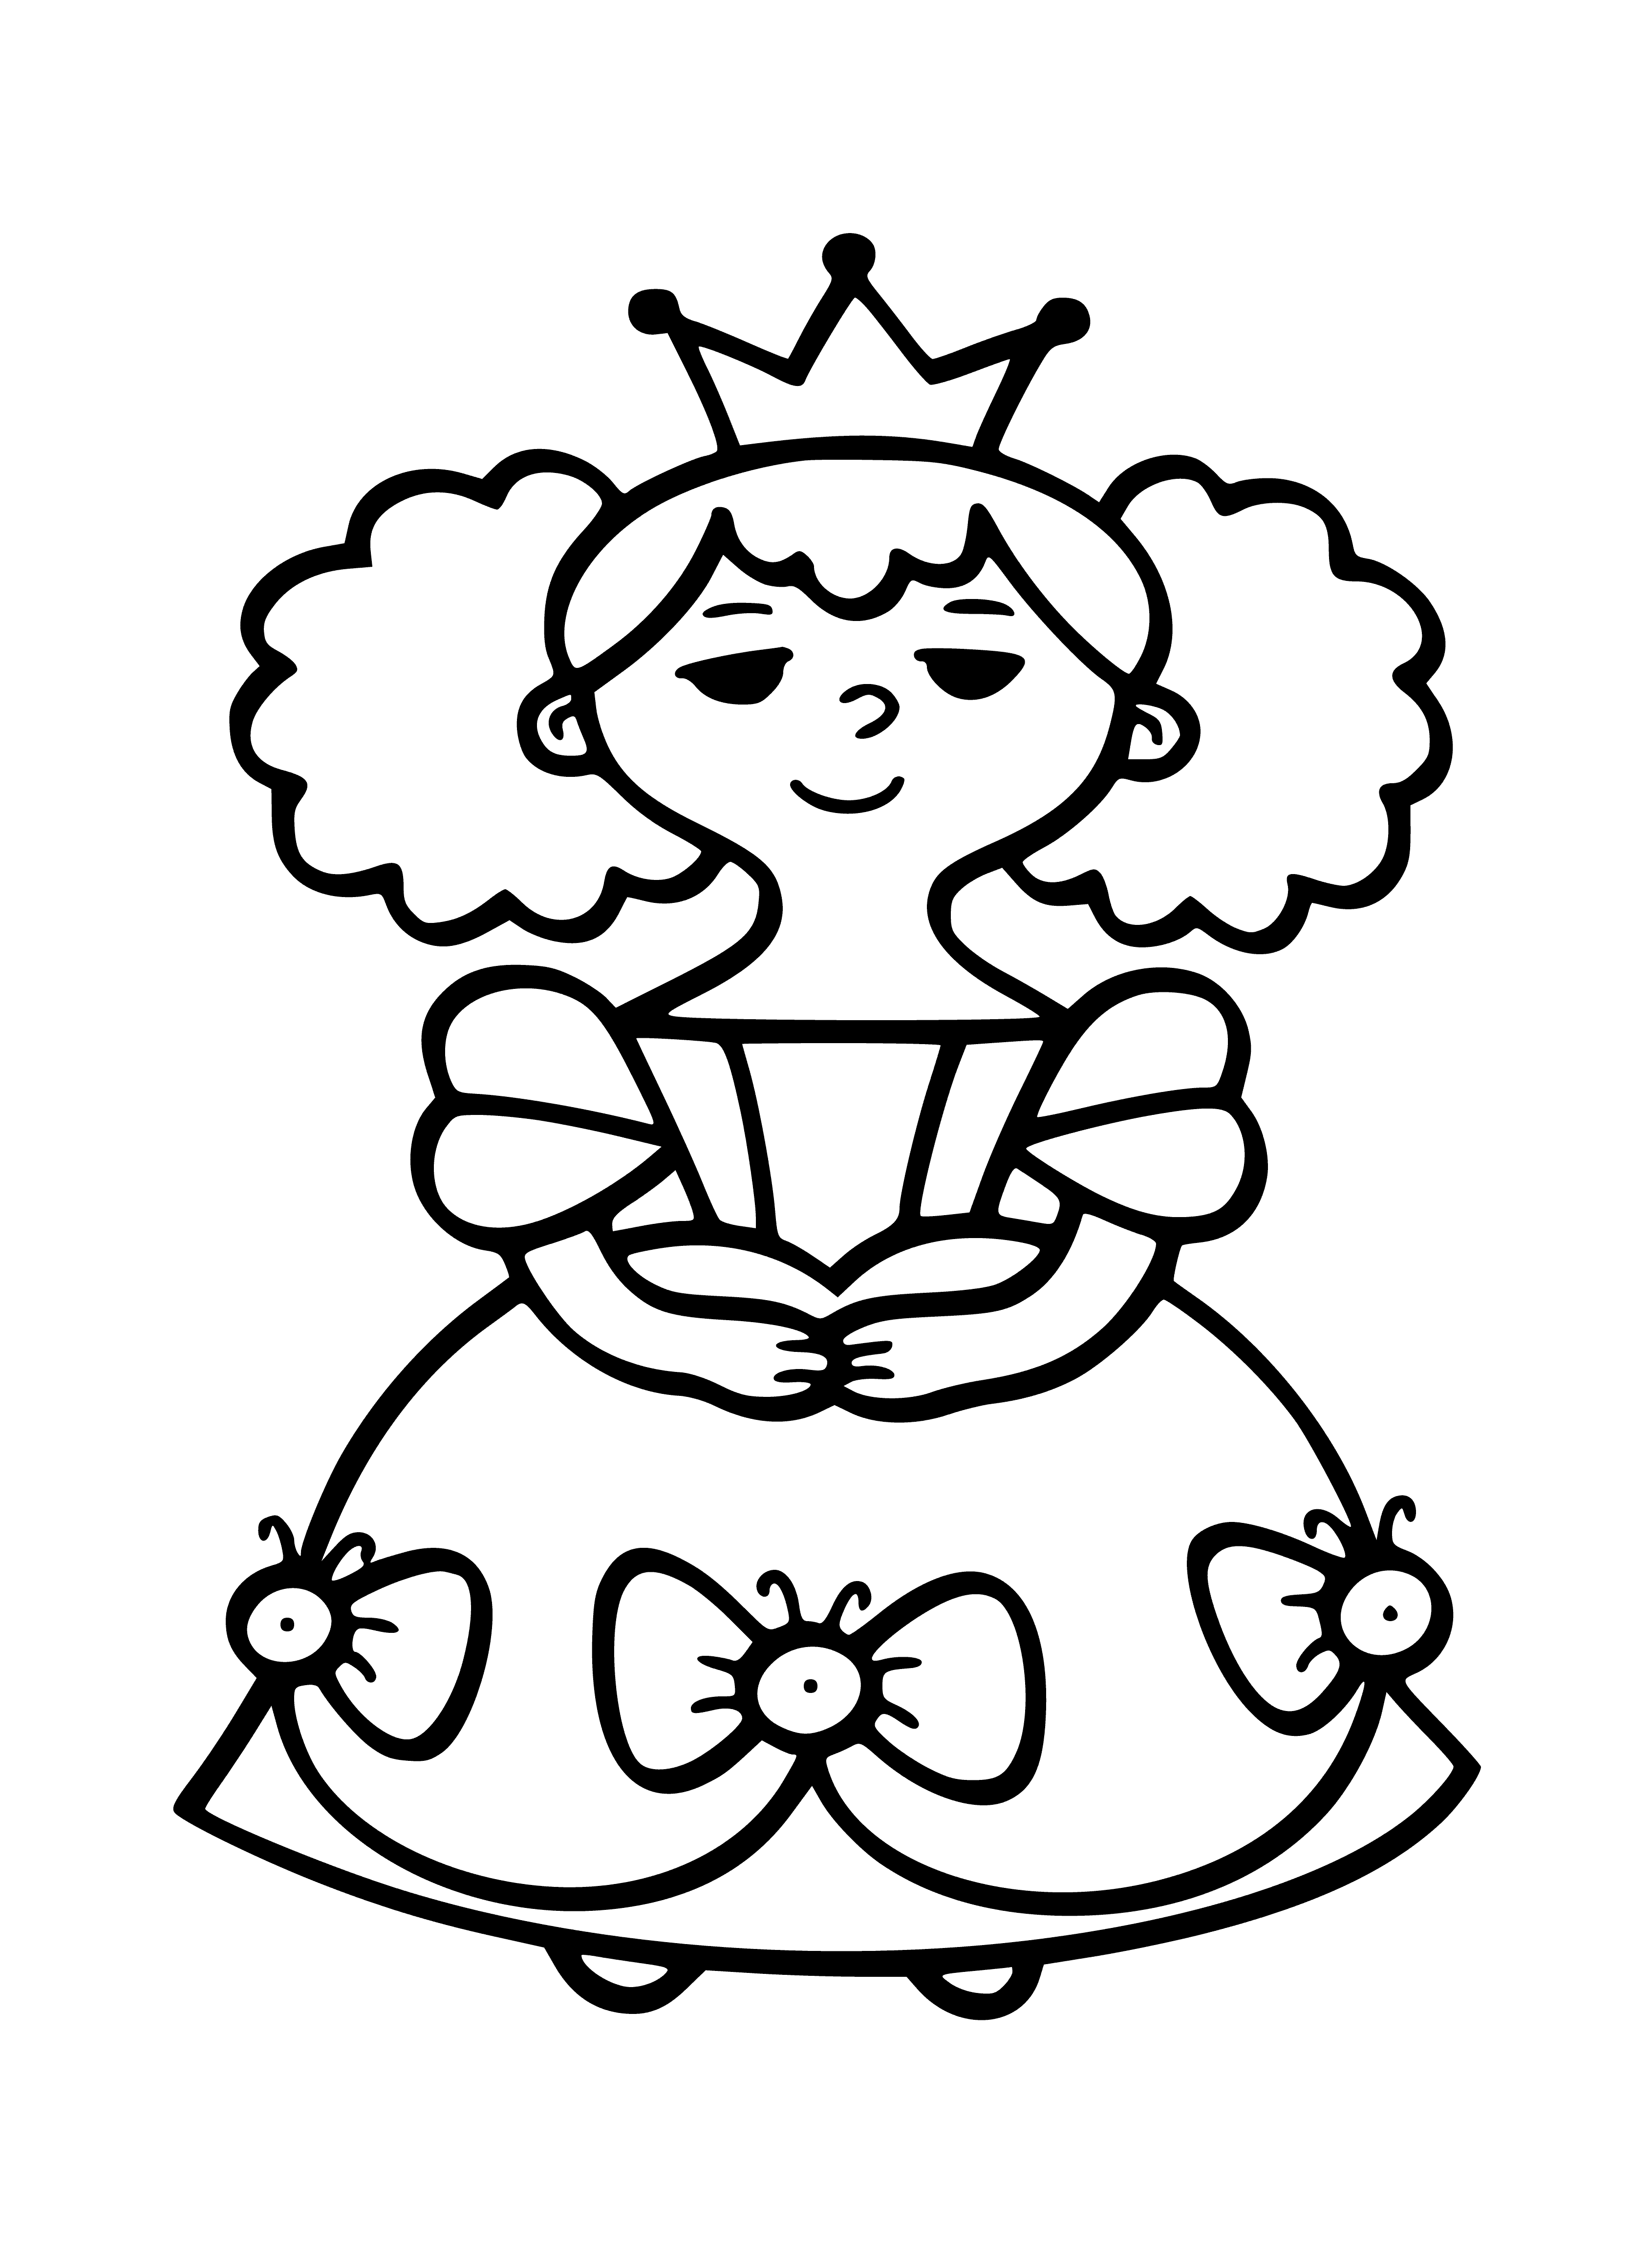 coloring page: Girl kneels in forefront looking at 3 figures in line wearing crowns and pointy hats; middle figure holds scepter.